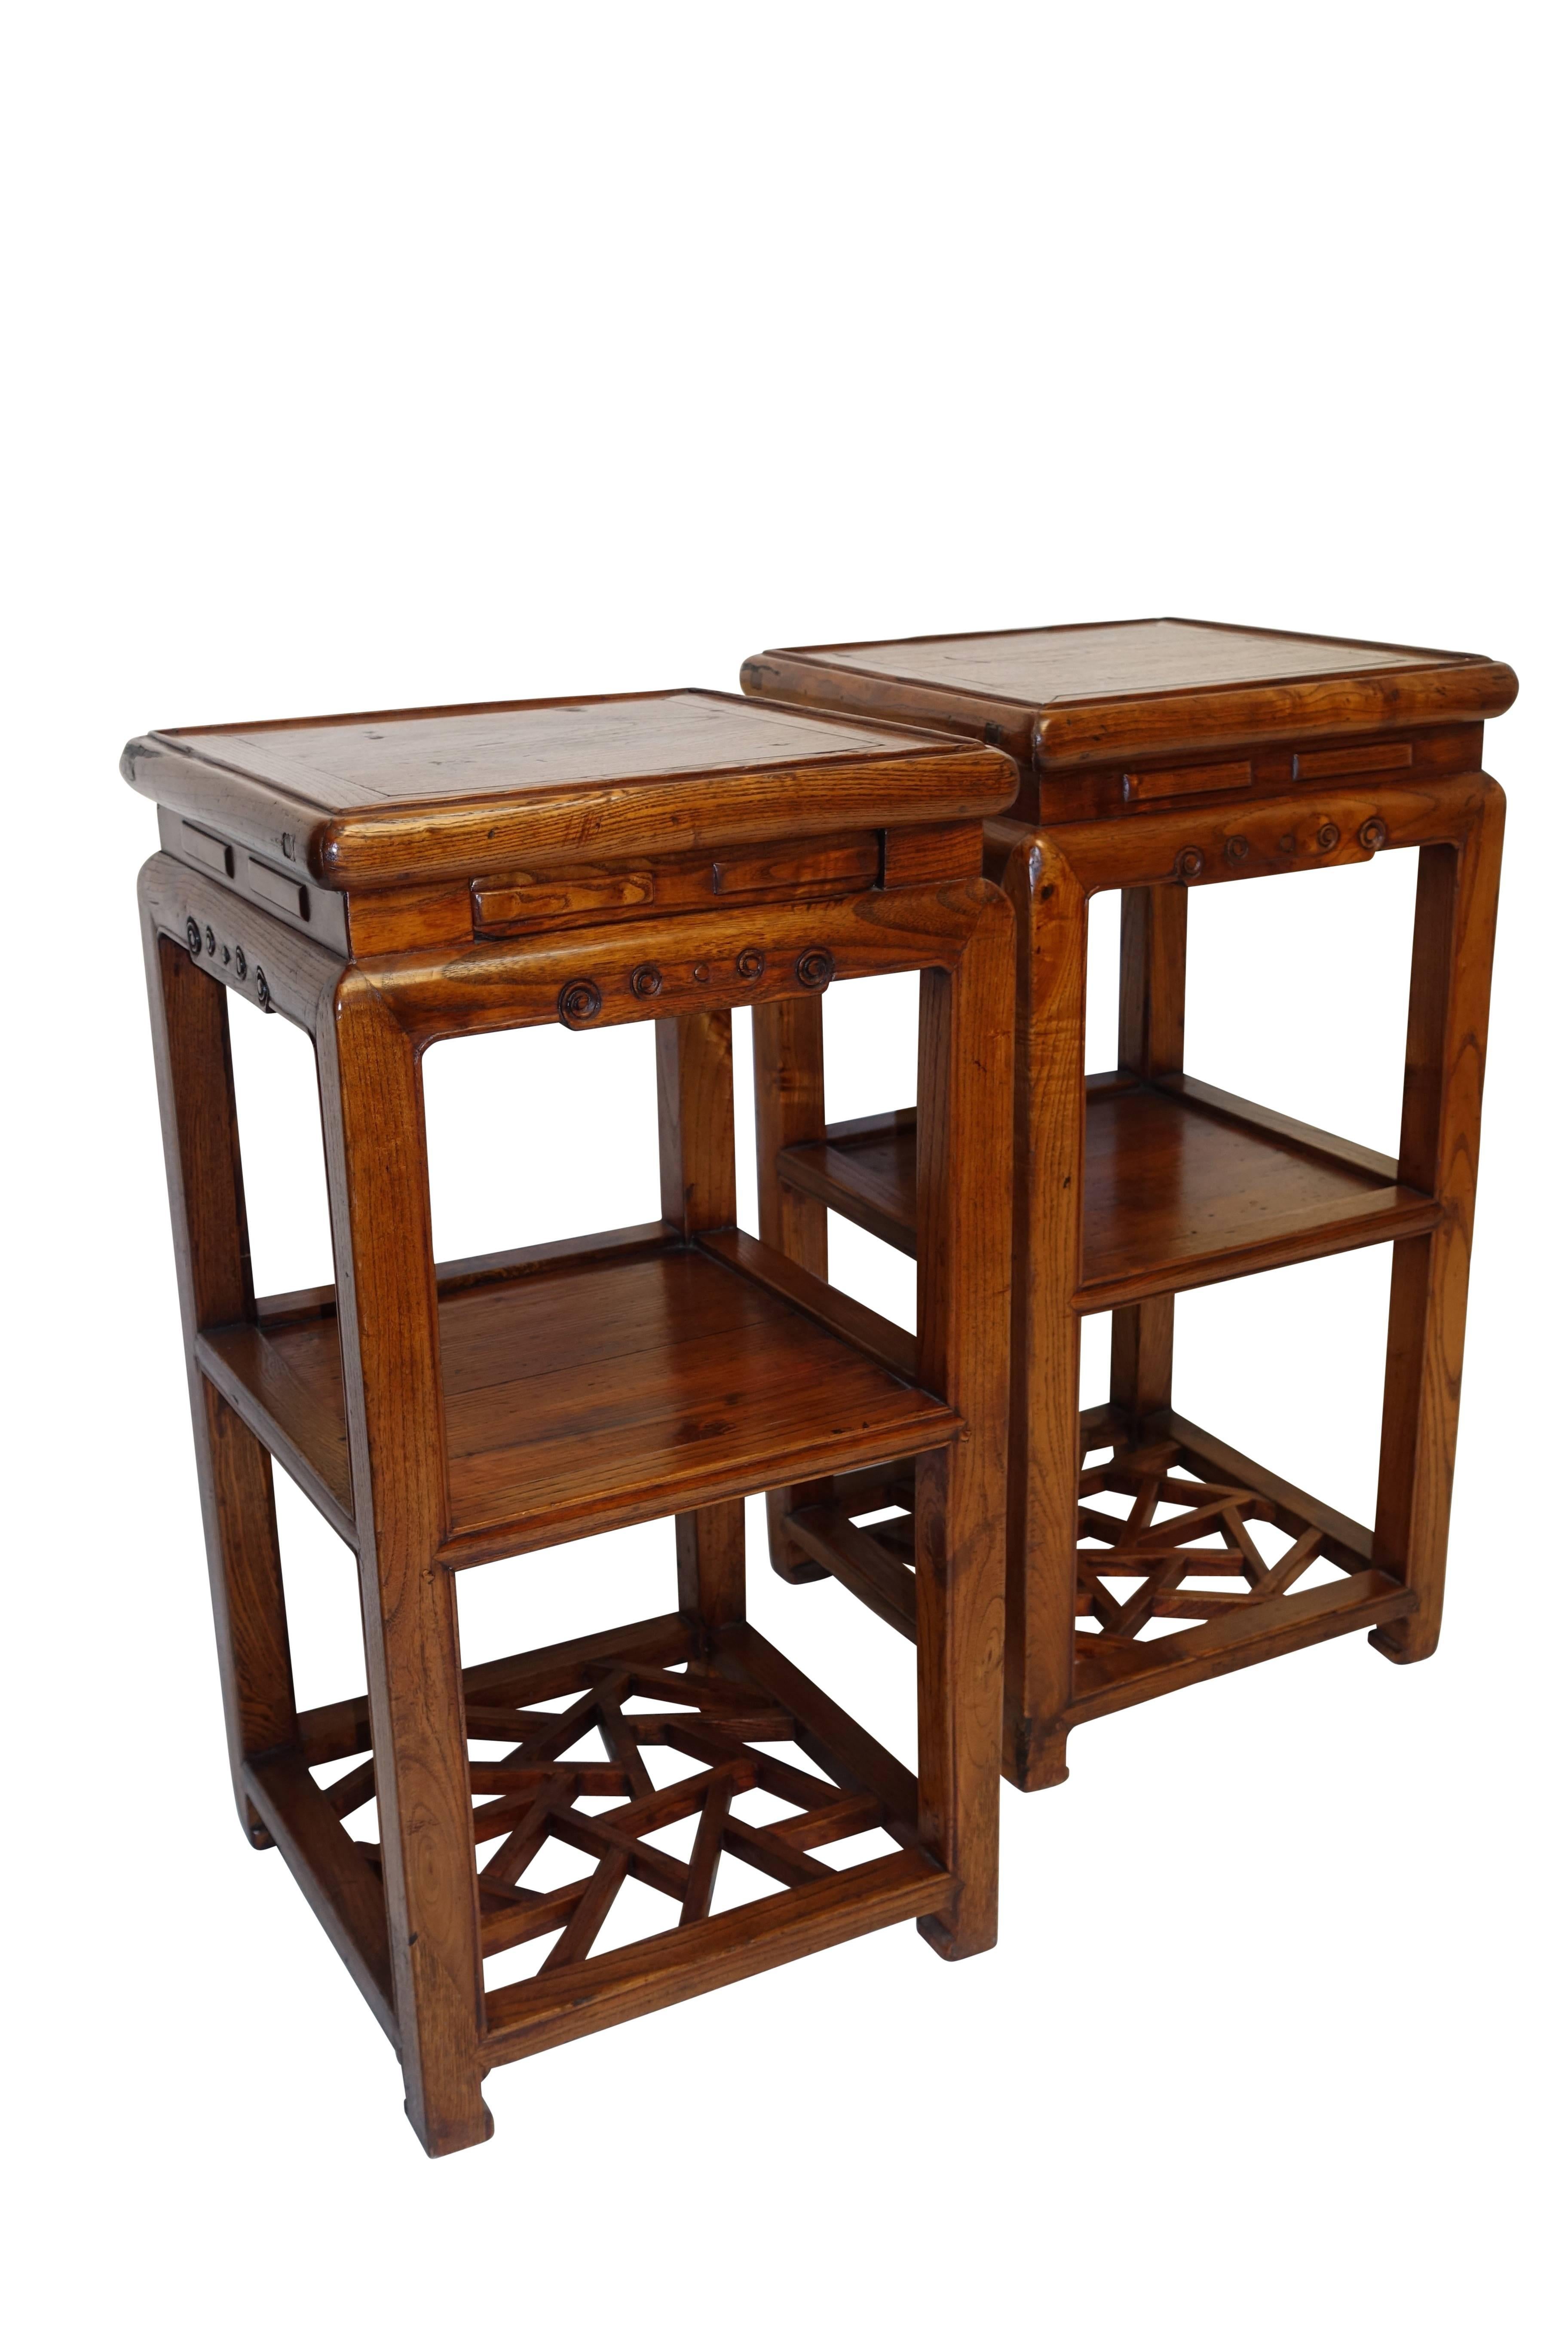 Wonderful pair of elmwood two tier stands or pedestals with secret drawer in the apron. Each stand having a lower shelf and a lower stretcher in broken ice design, standing with feet ending in chow foot. China, Qing dynasty.